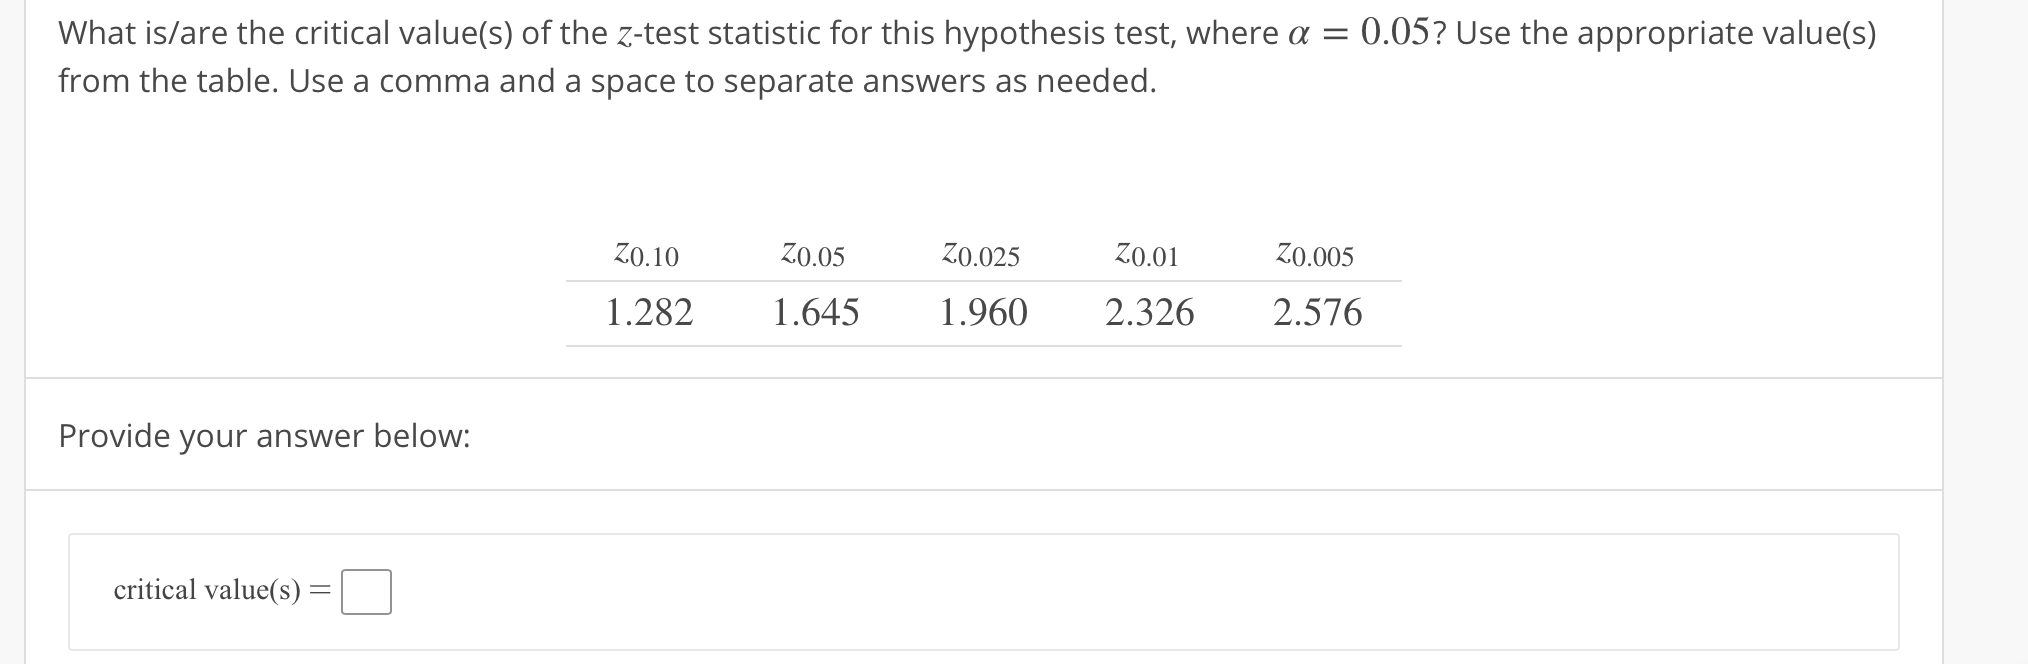 What is/are the critical value(s) of the z-test statistic for this hypothesis test, where α = 0.05? Use the appropriate value(s)
from the table. Use a comma and a space to separate answers as needed.
Z0.10Z0.05 Z0.025 o.01 0.005
1.282 645 1960 2.326 2.576
Provide your answer below:
critical value(s)-
